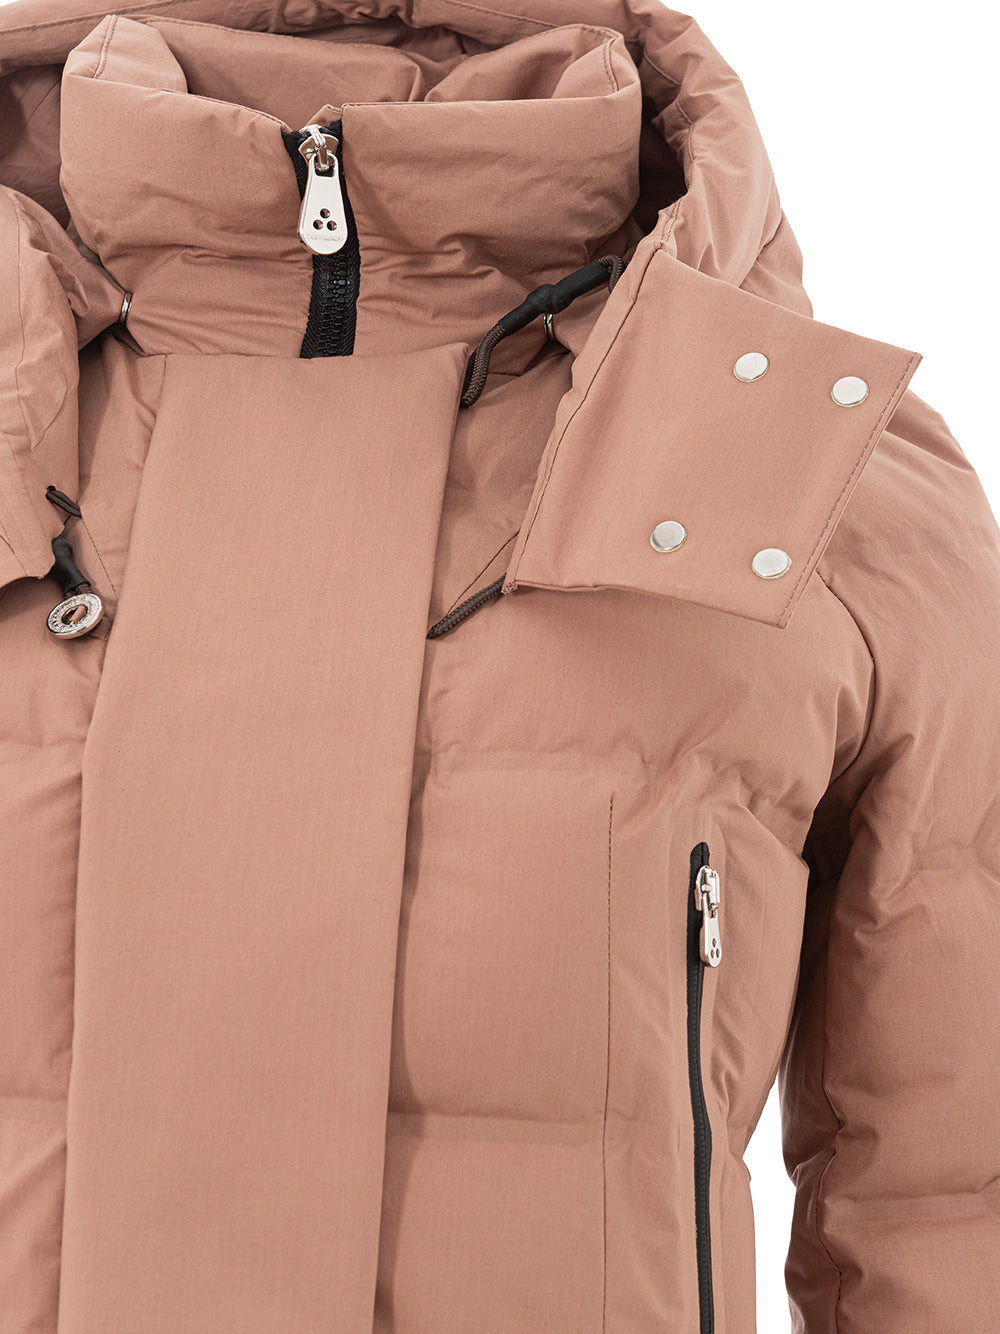 Peuterey Light Pink Puffy Quilted Jacket - DEA STILOSA MILANO